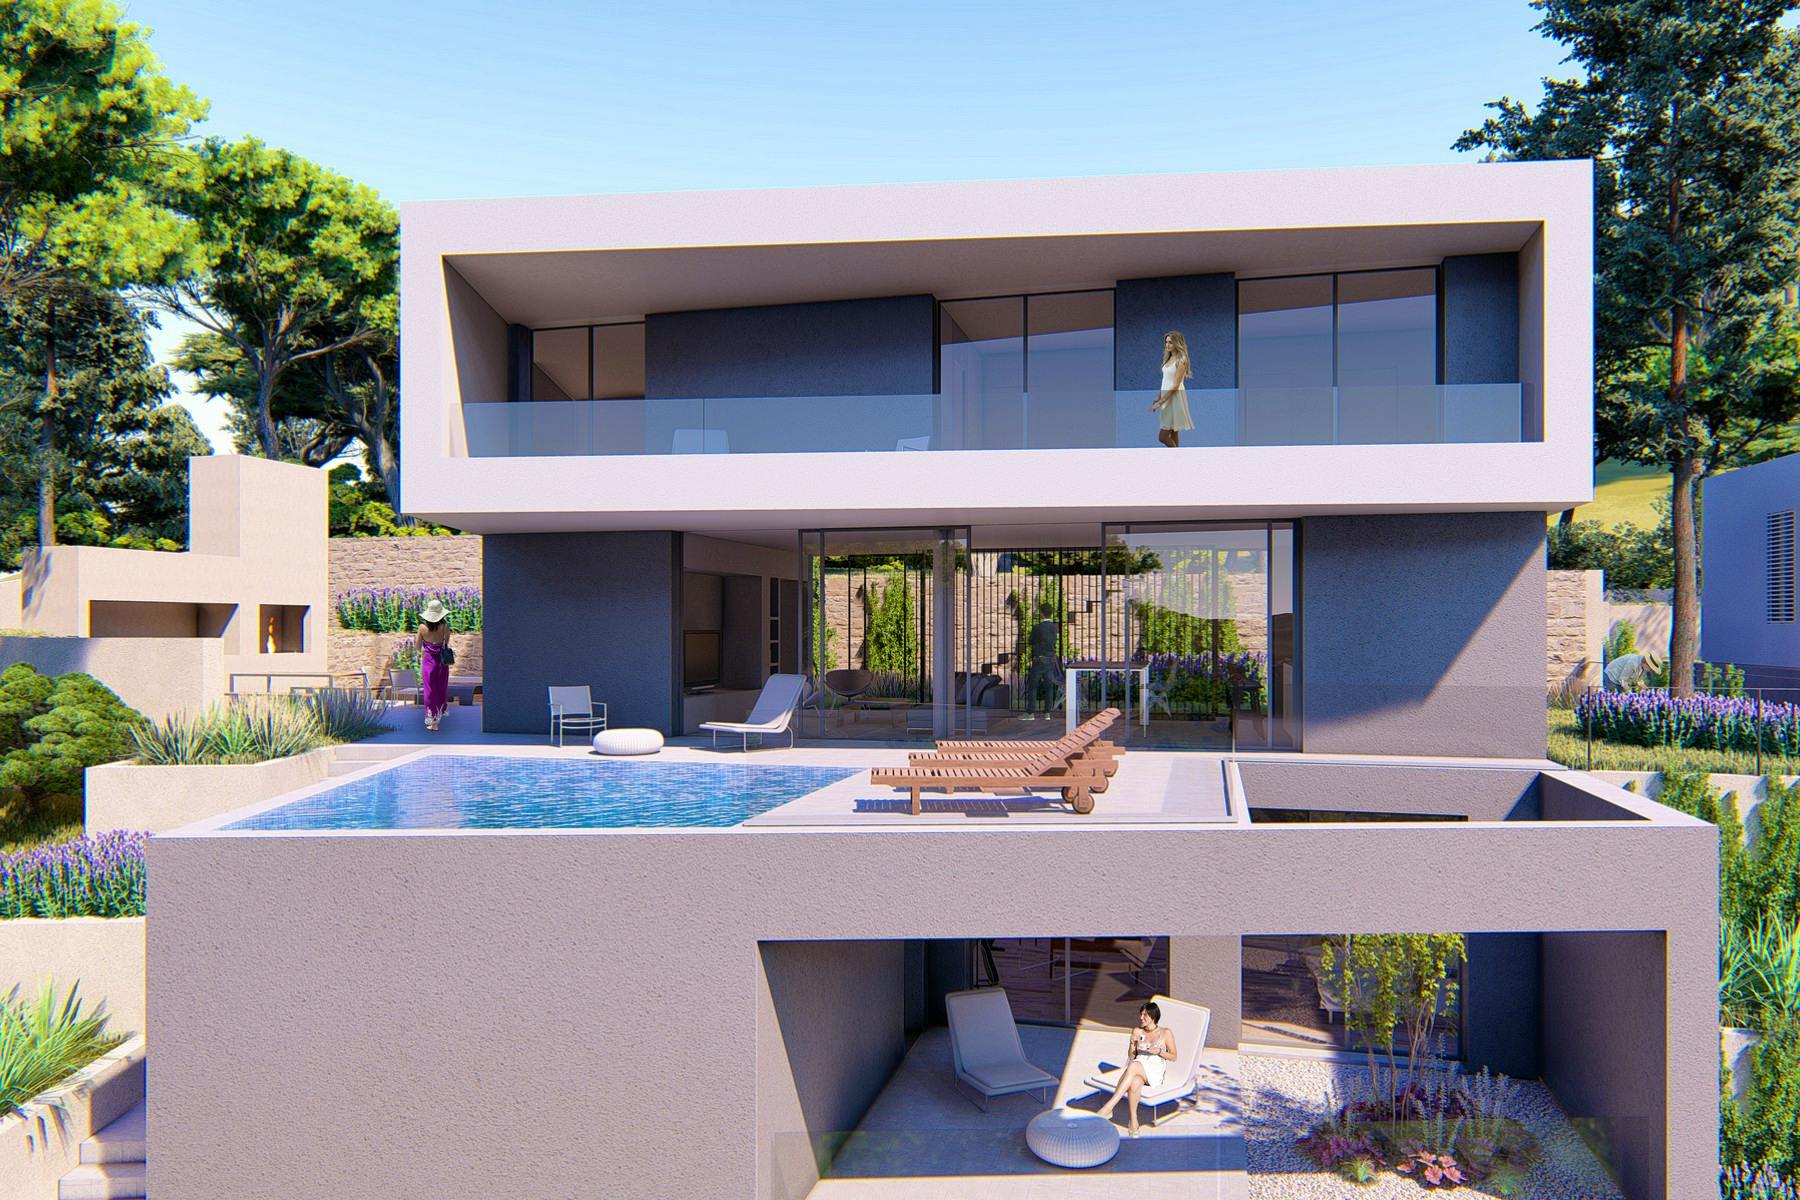 Minimalist style villa in the finals construction stage